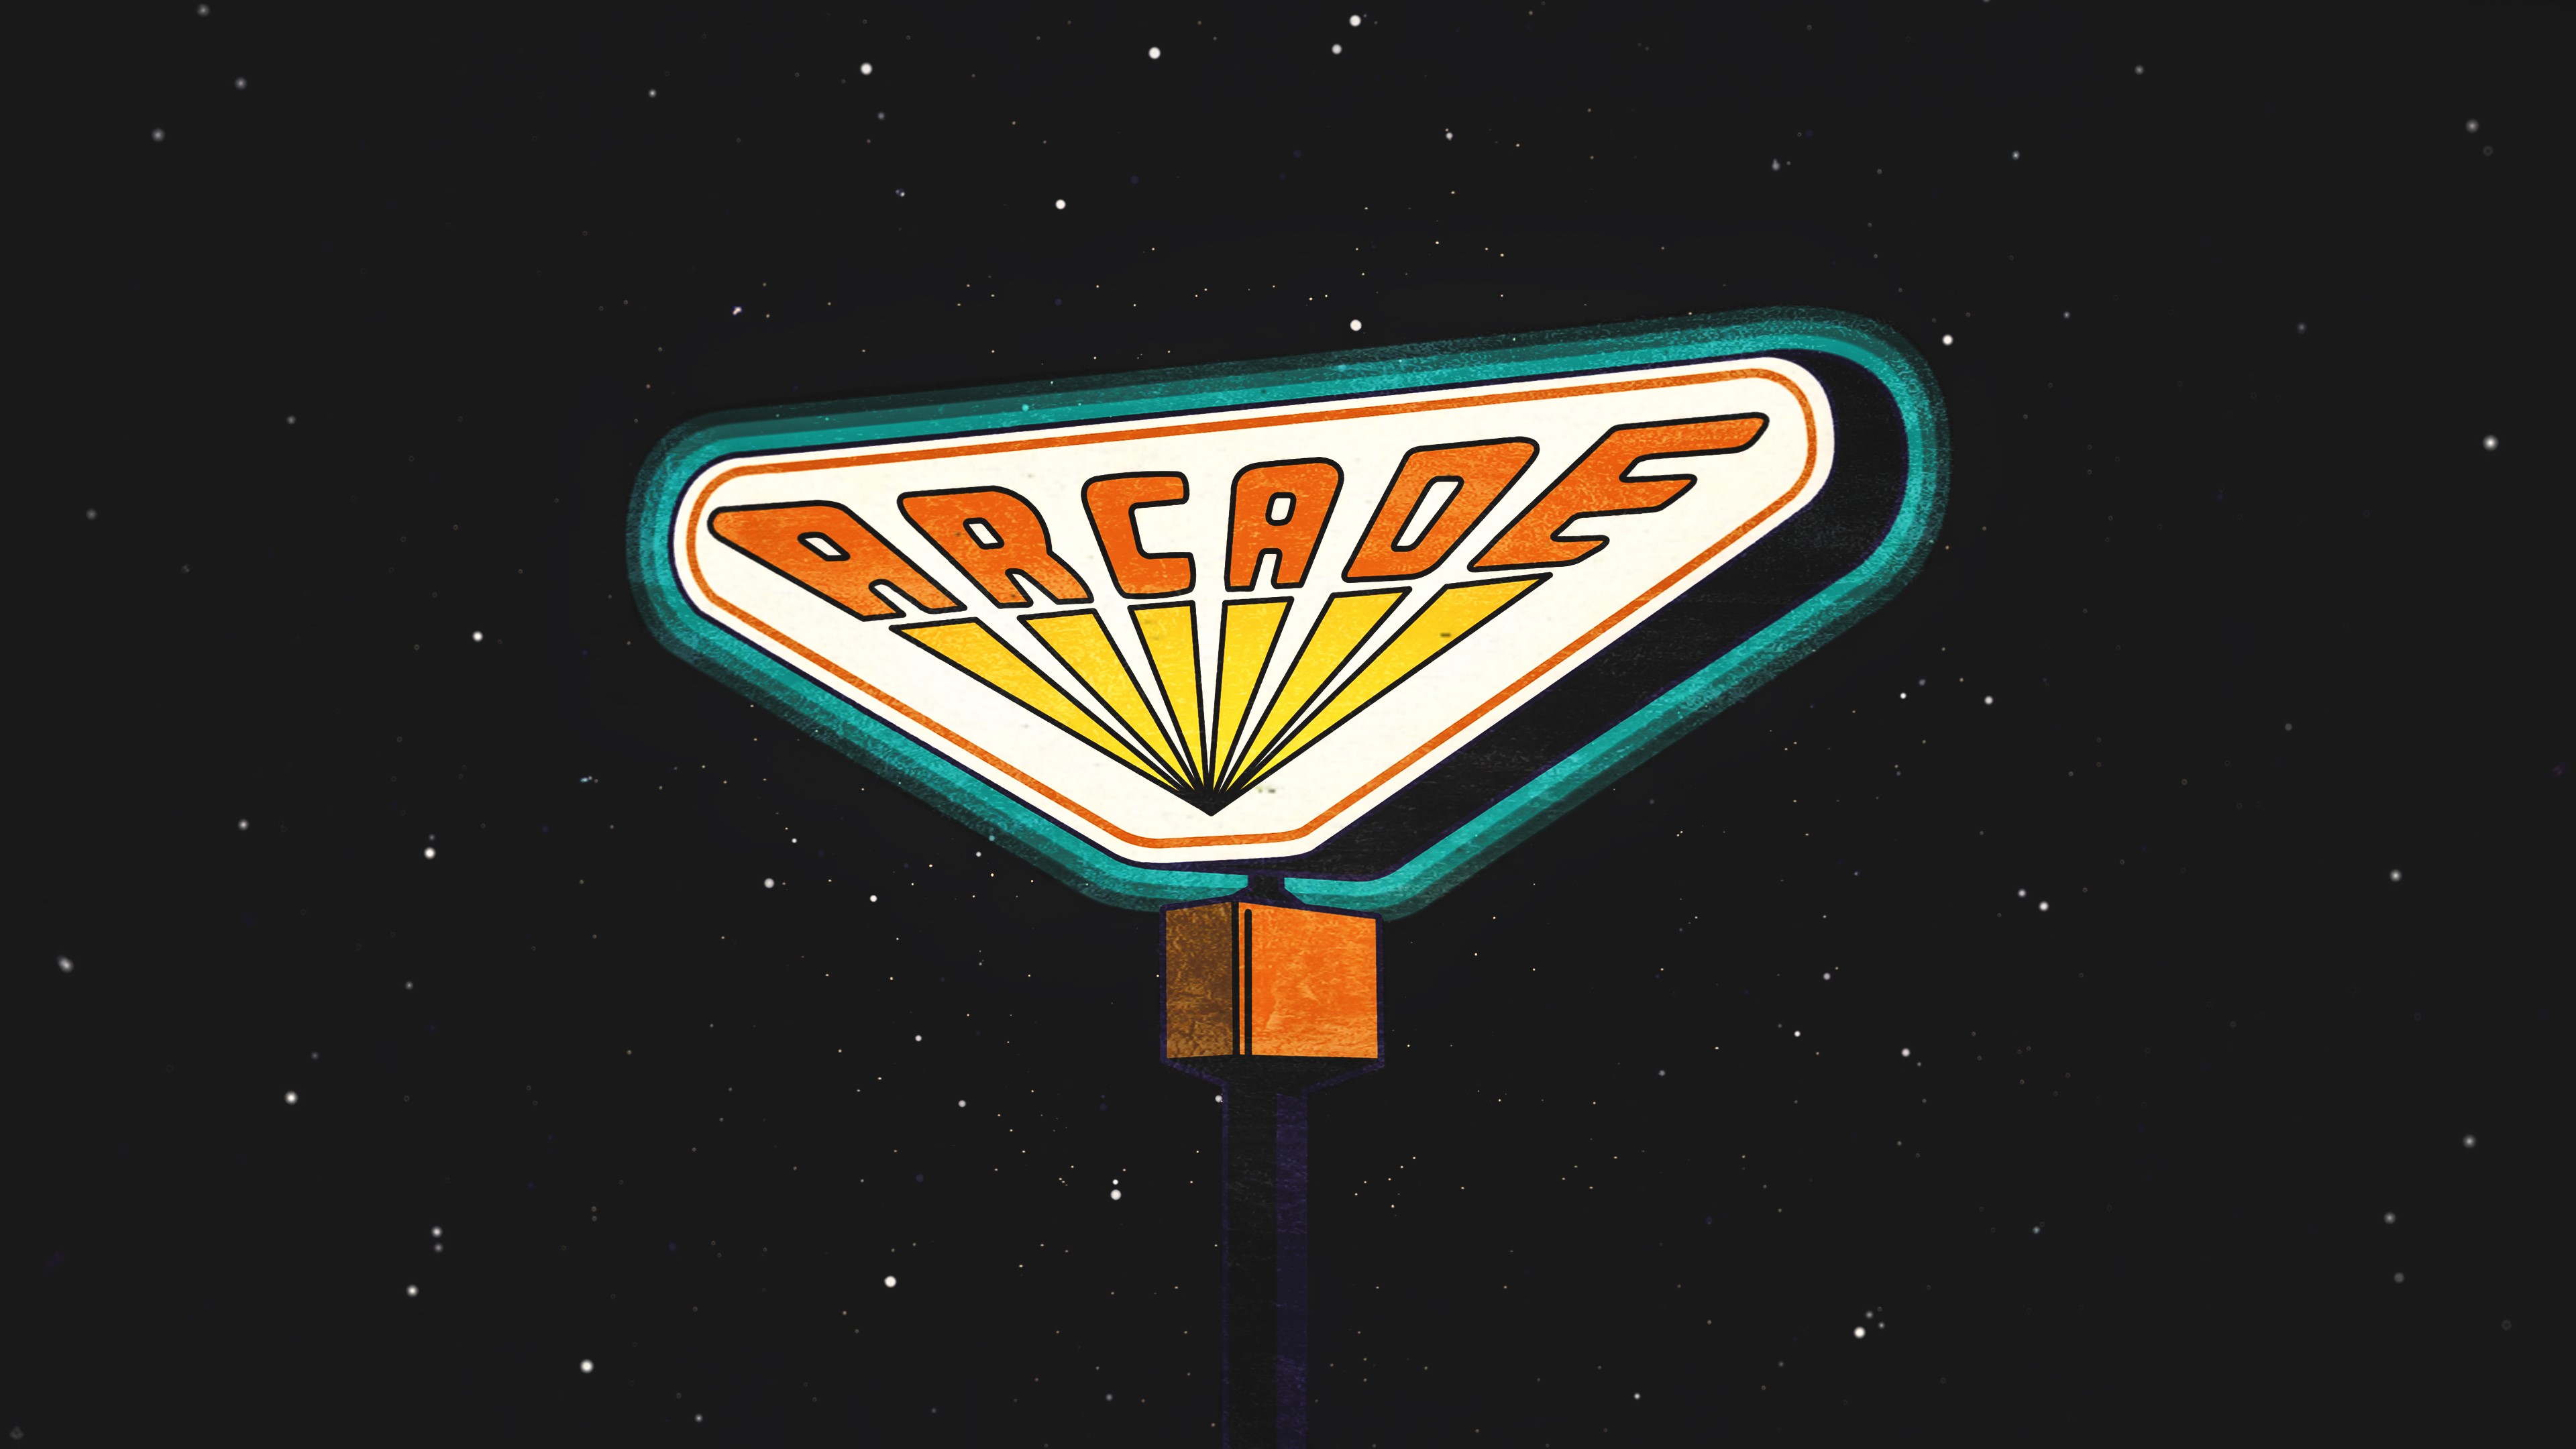 Arcade sign in the middle of the night - Stranger Things